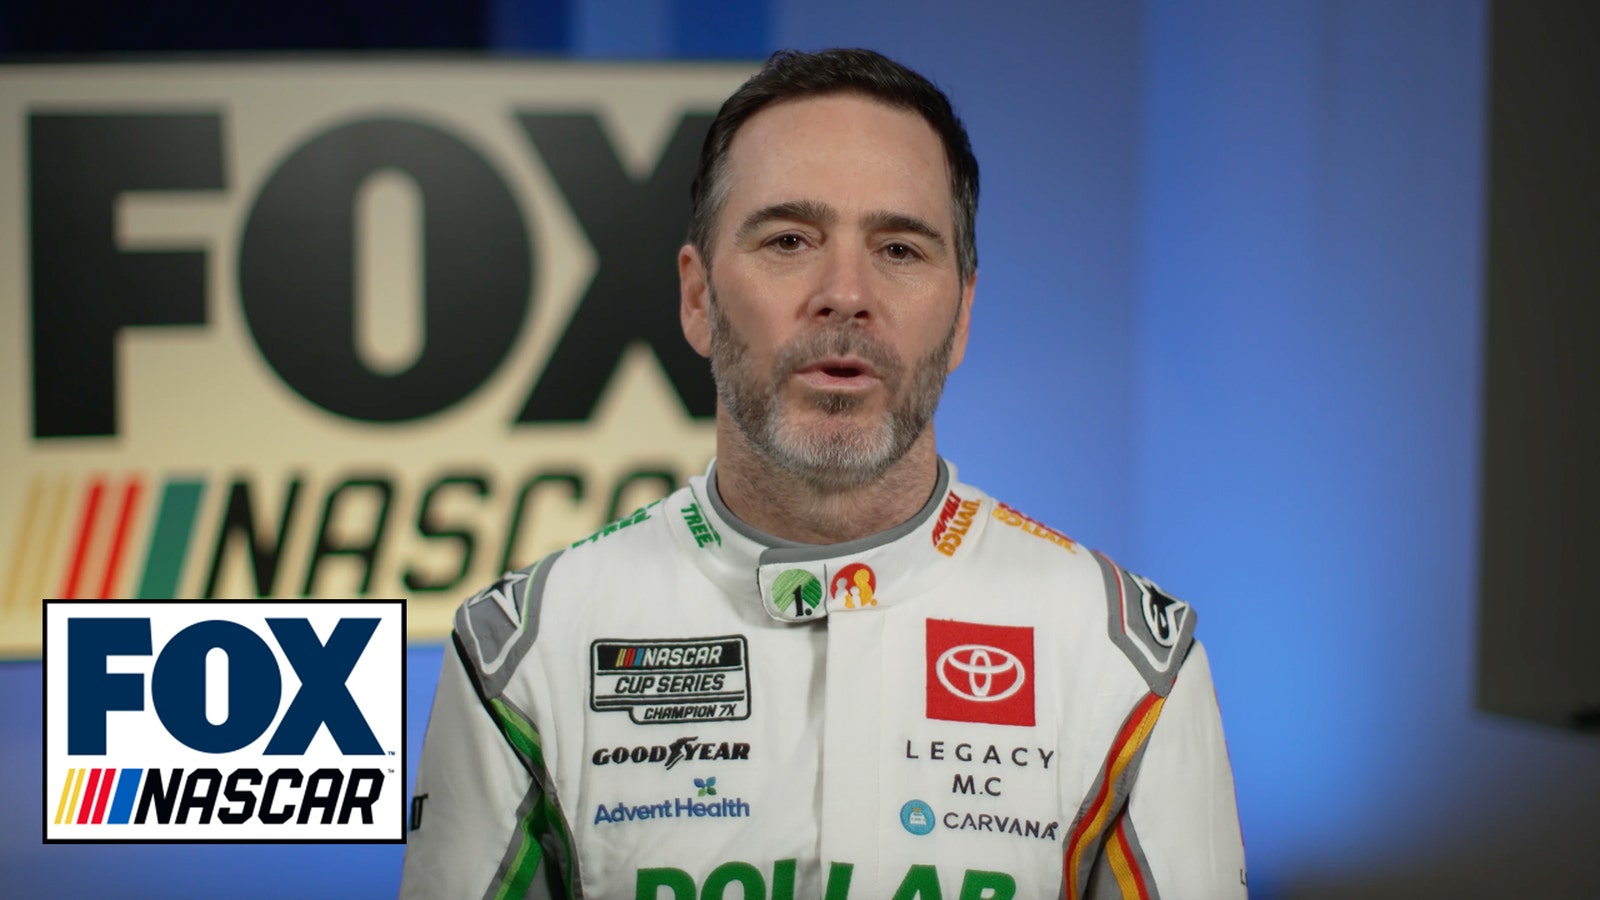 Jimmie Johnson explains which nine Cup Series races are on his schedule and why